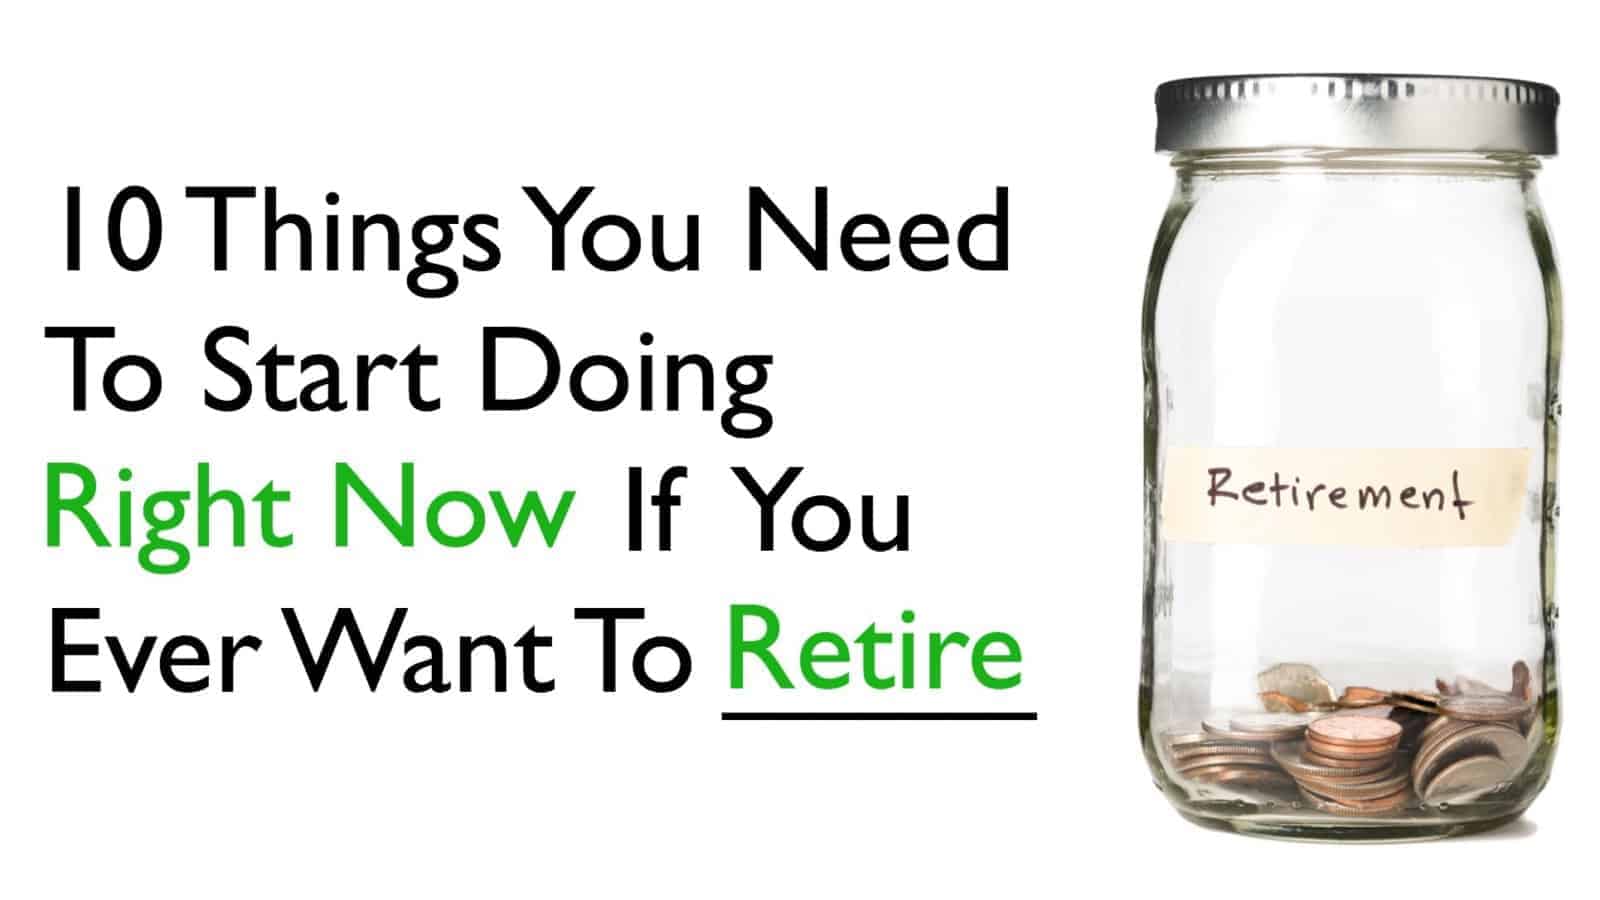 10 Things You Need to Start Doing Right Now If You Want To Ever Retire